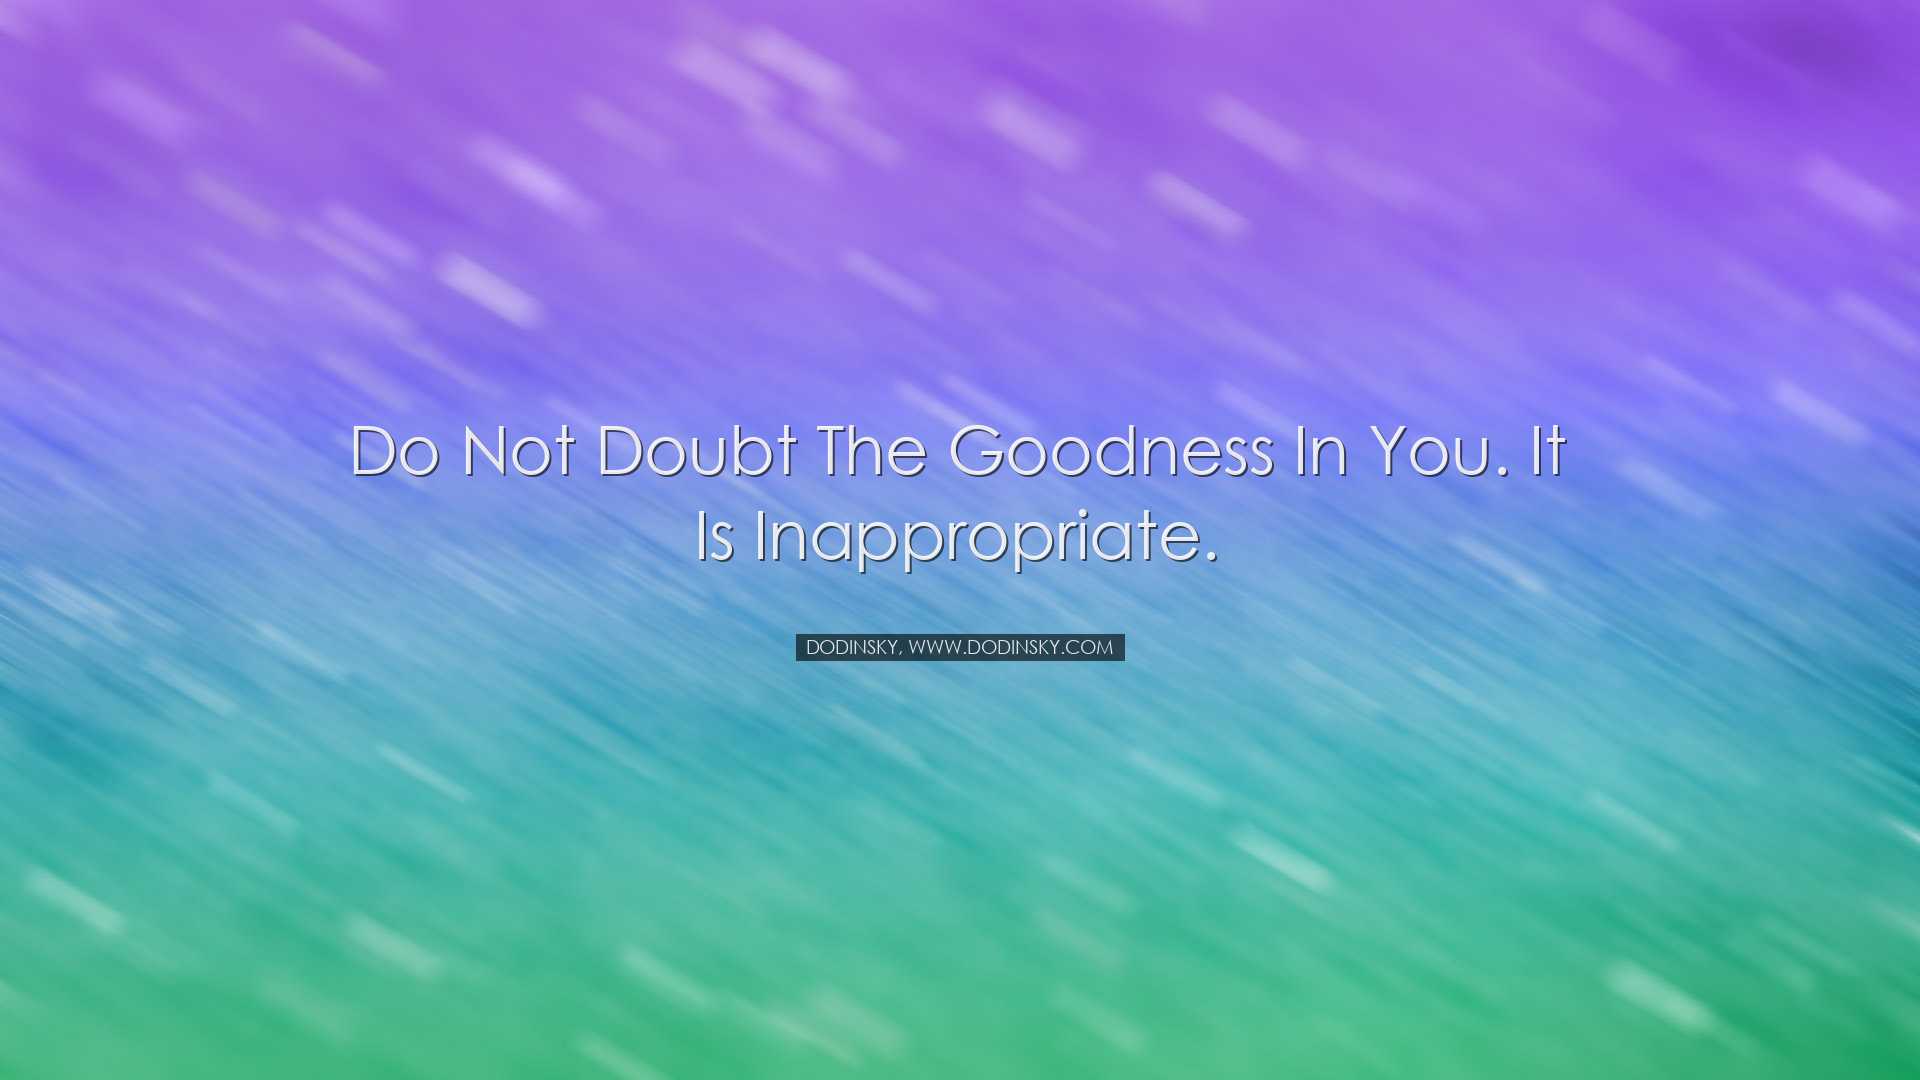 Do not doubt the goodness in you. It is inappropriate. - Dodinsky,